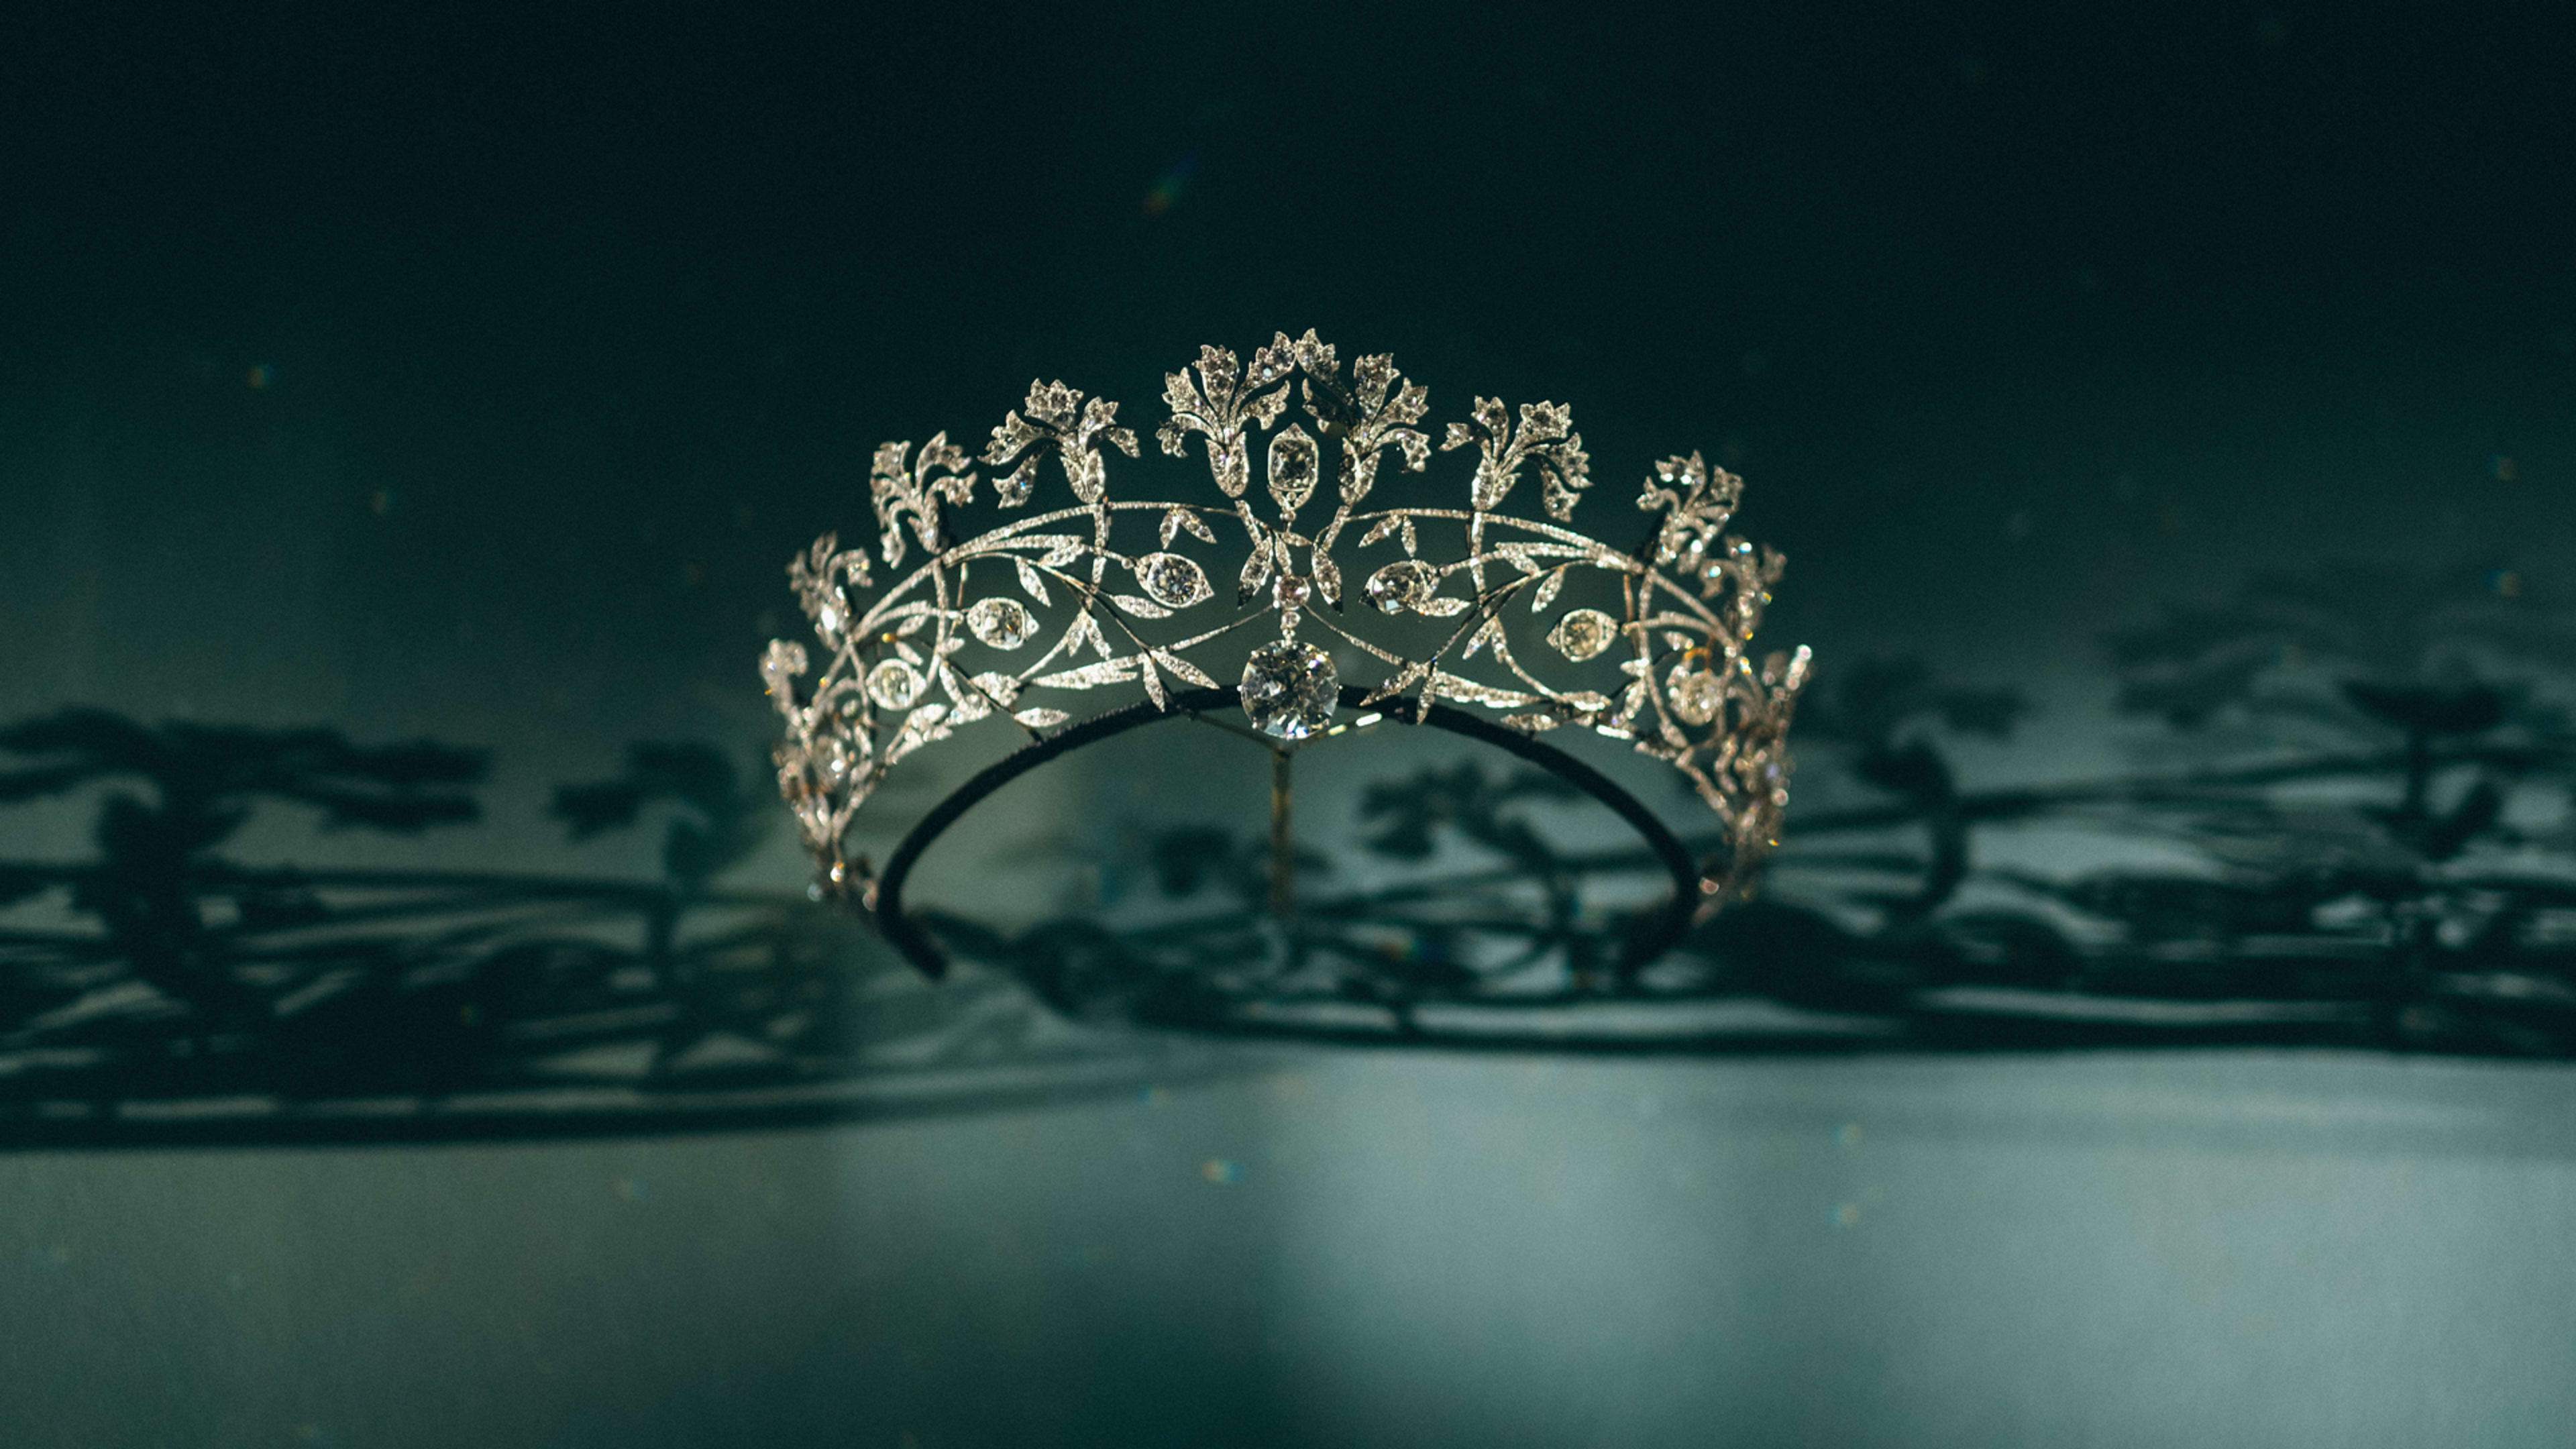 A visual history of the most coveted design object of all: Tiaras